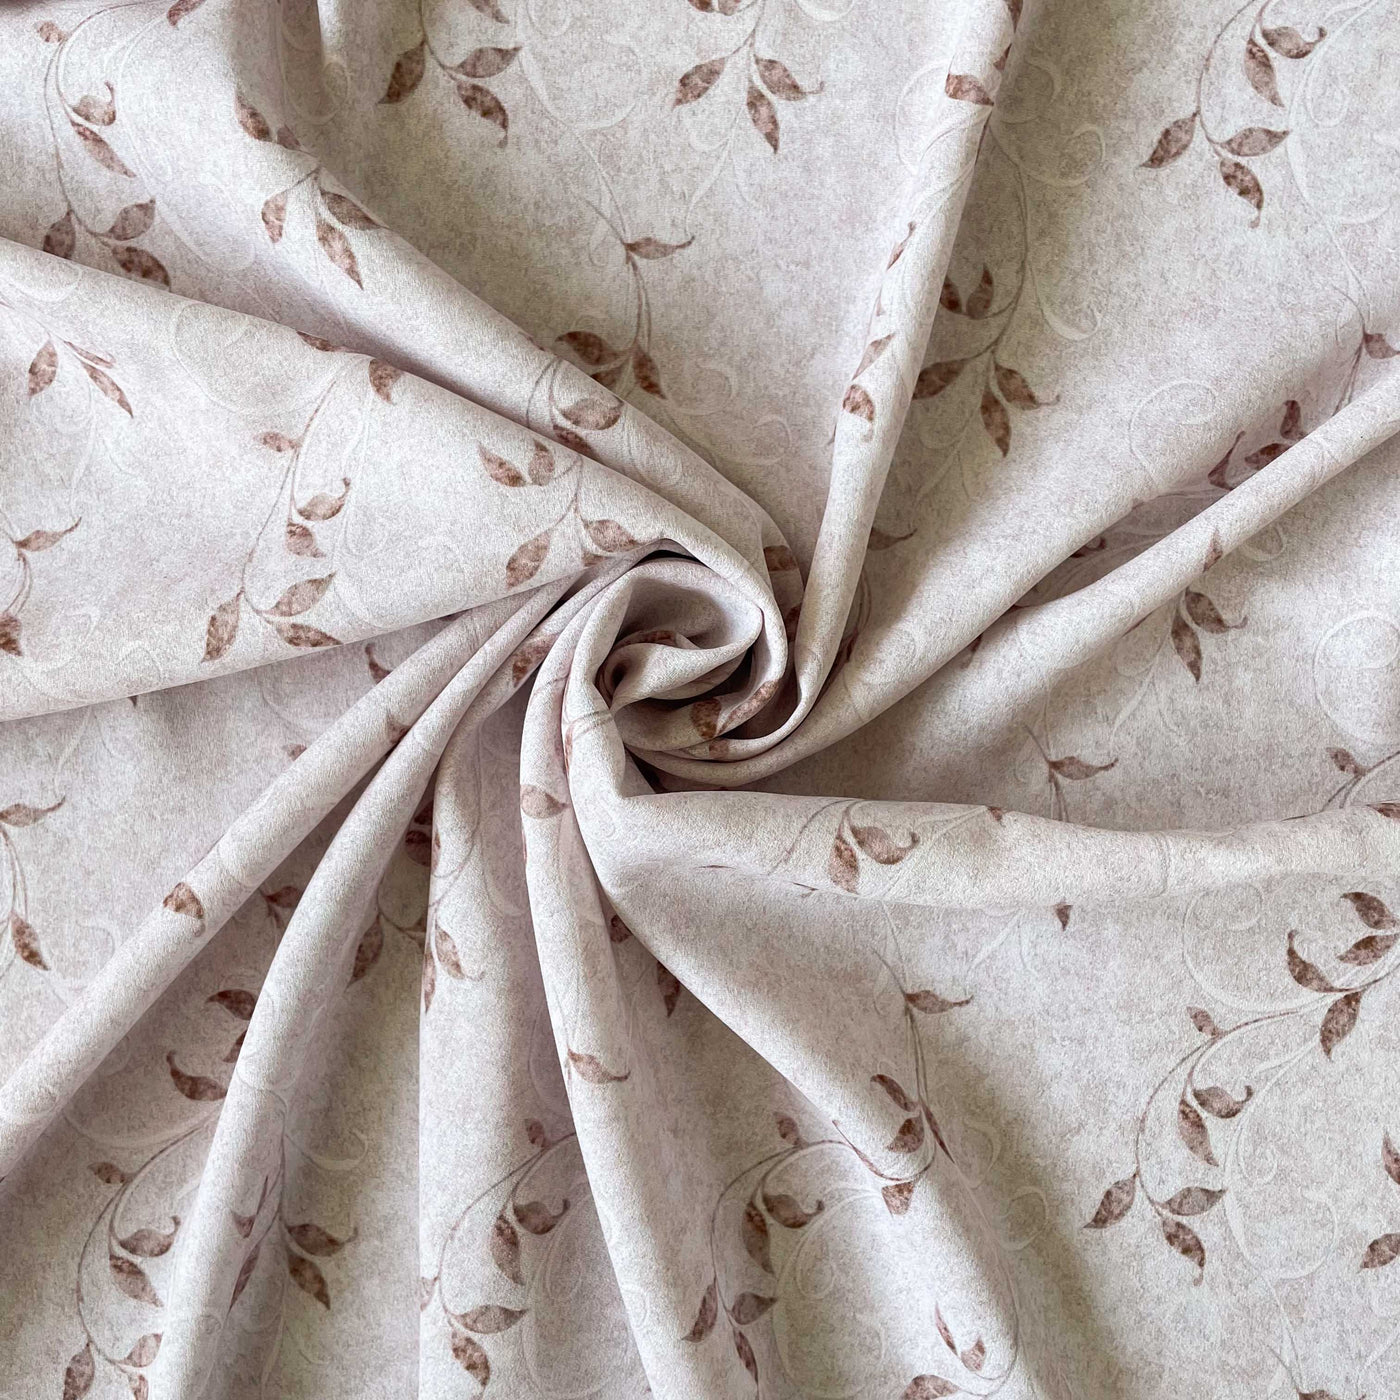 Digital Printed Pure Crepe Fabric Fabric Beige & Brown Abstract Leaves Printed Dull Crepe Fabric (Width 44 Inches)